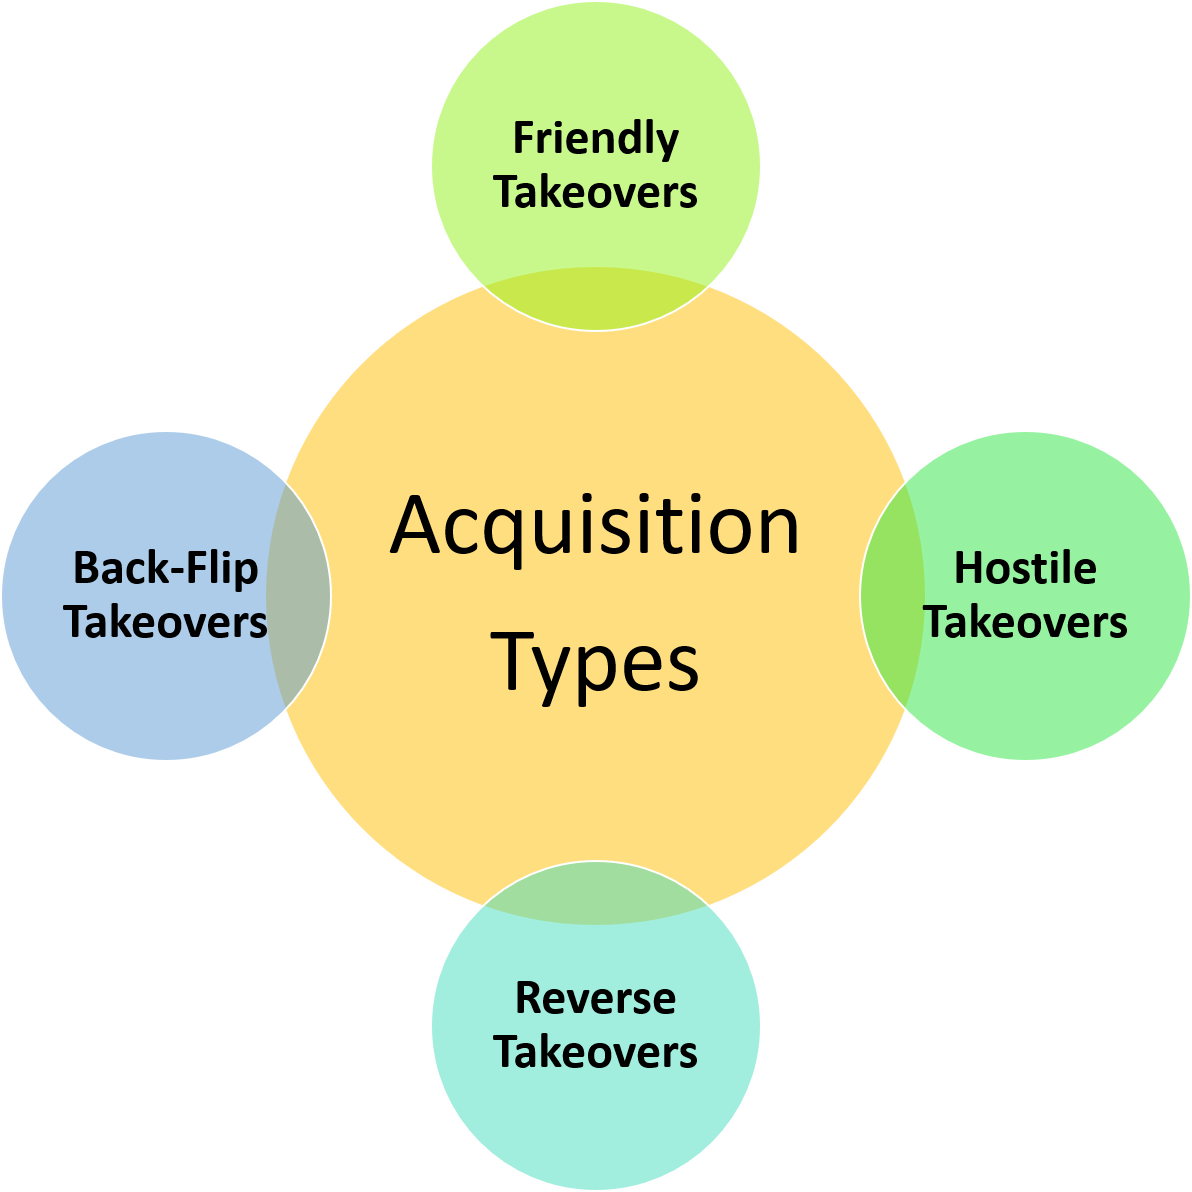 What Is an Acquisition? Definition, Meaning, Types, and Examples